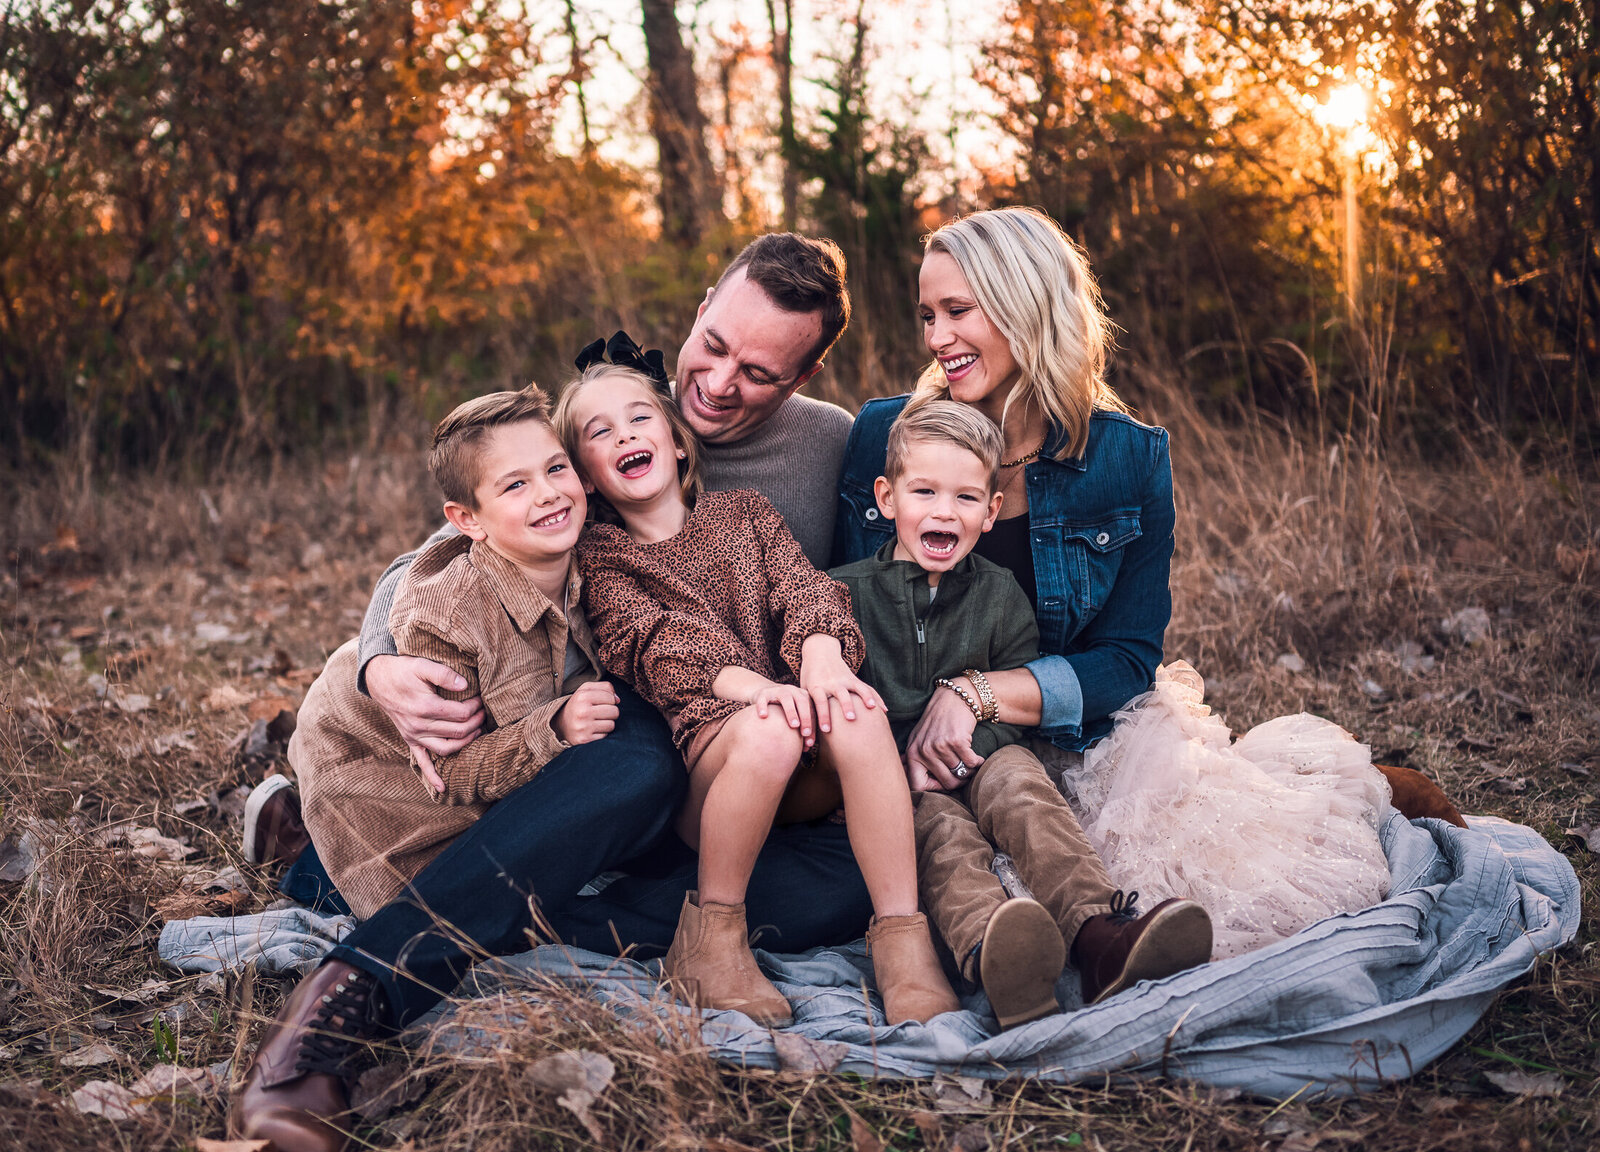 Fun family photography session at sunset